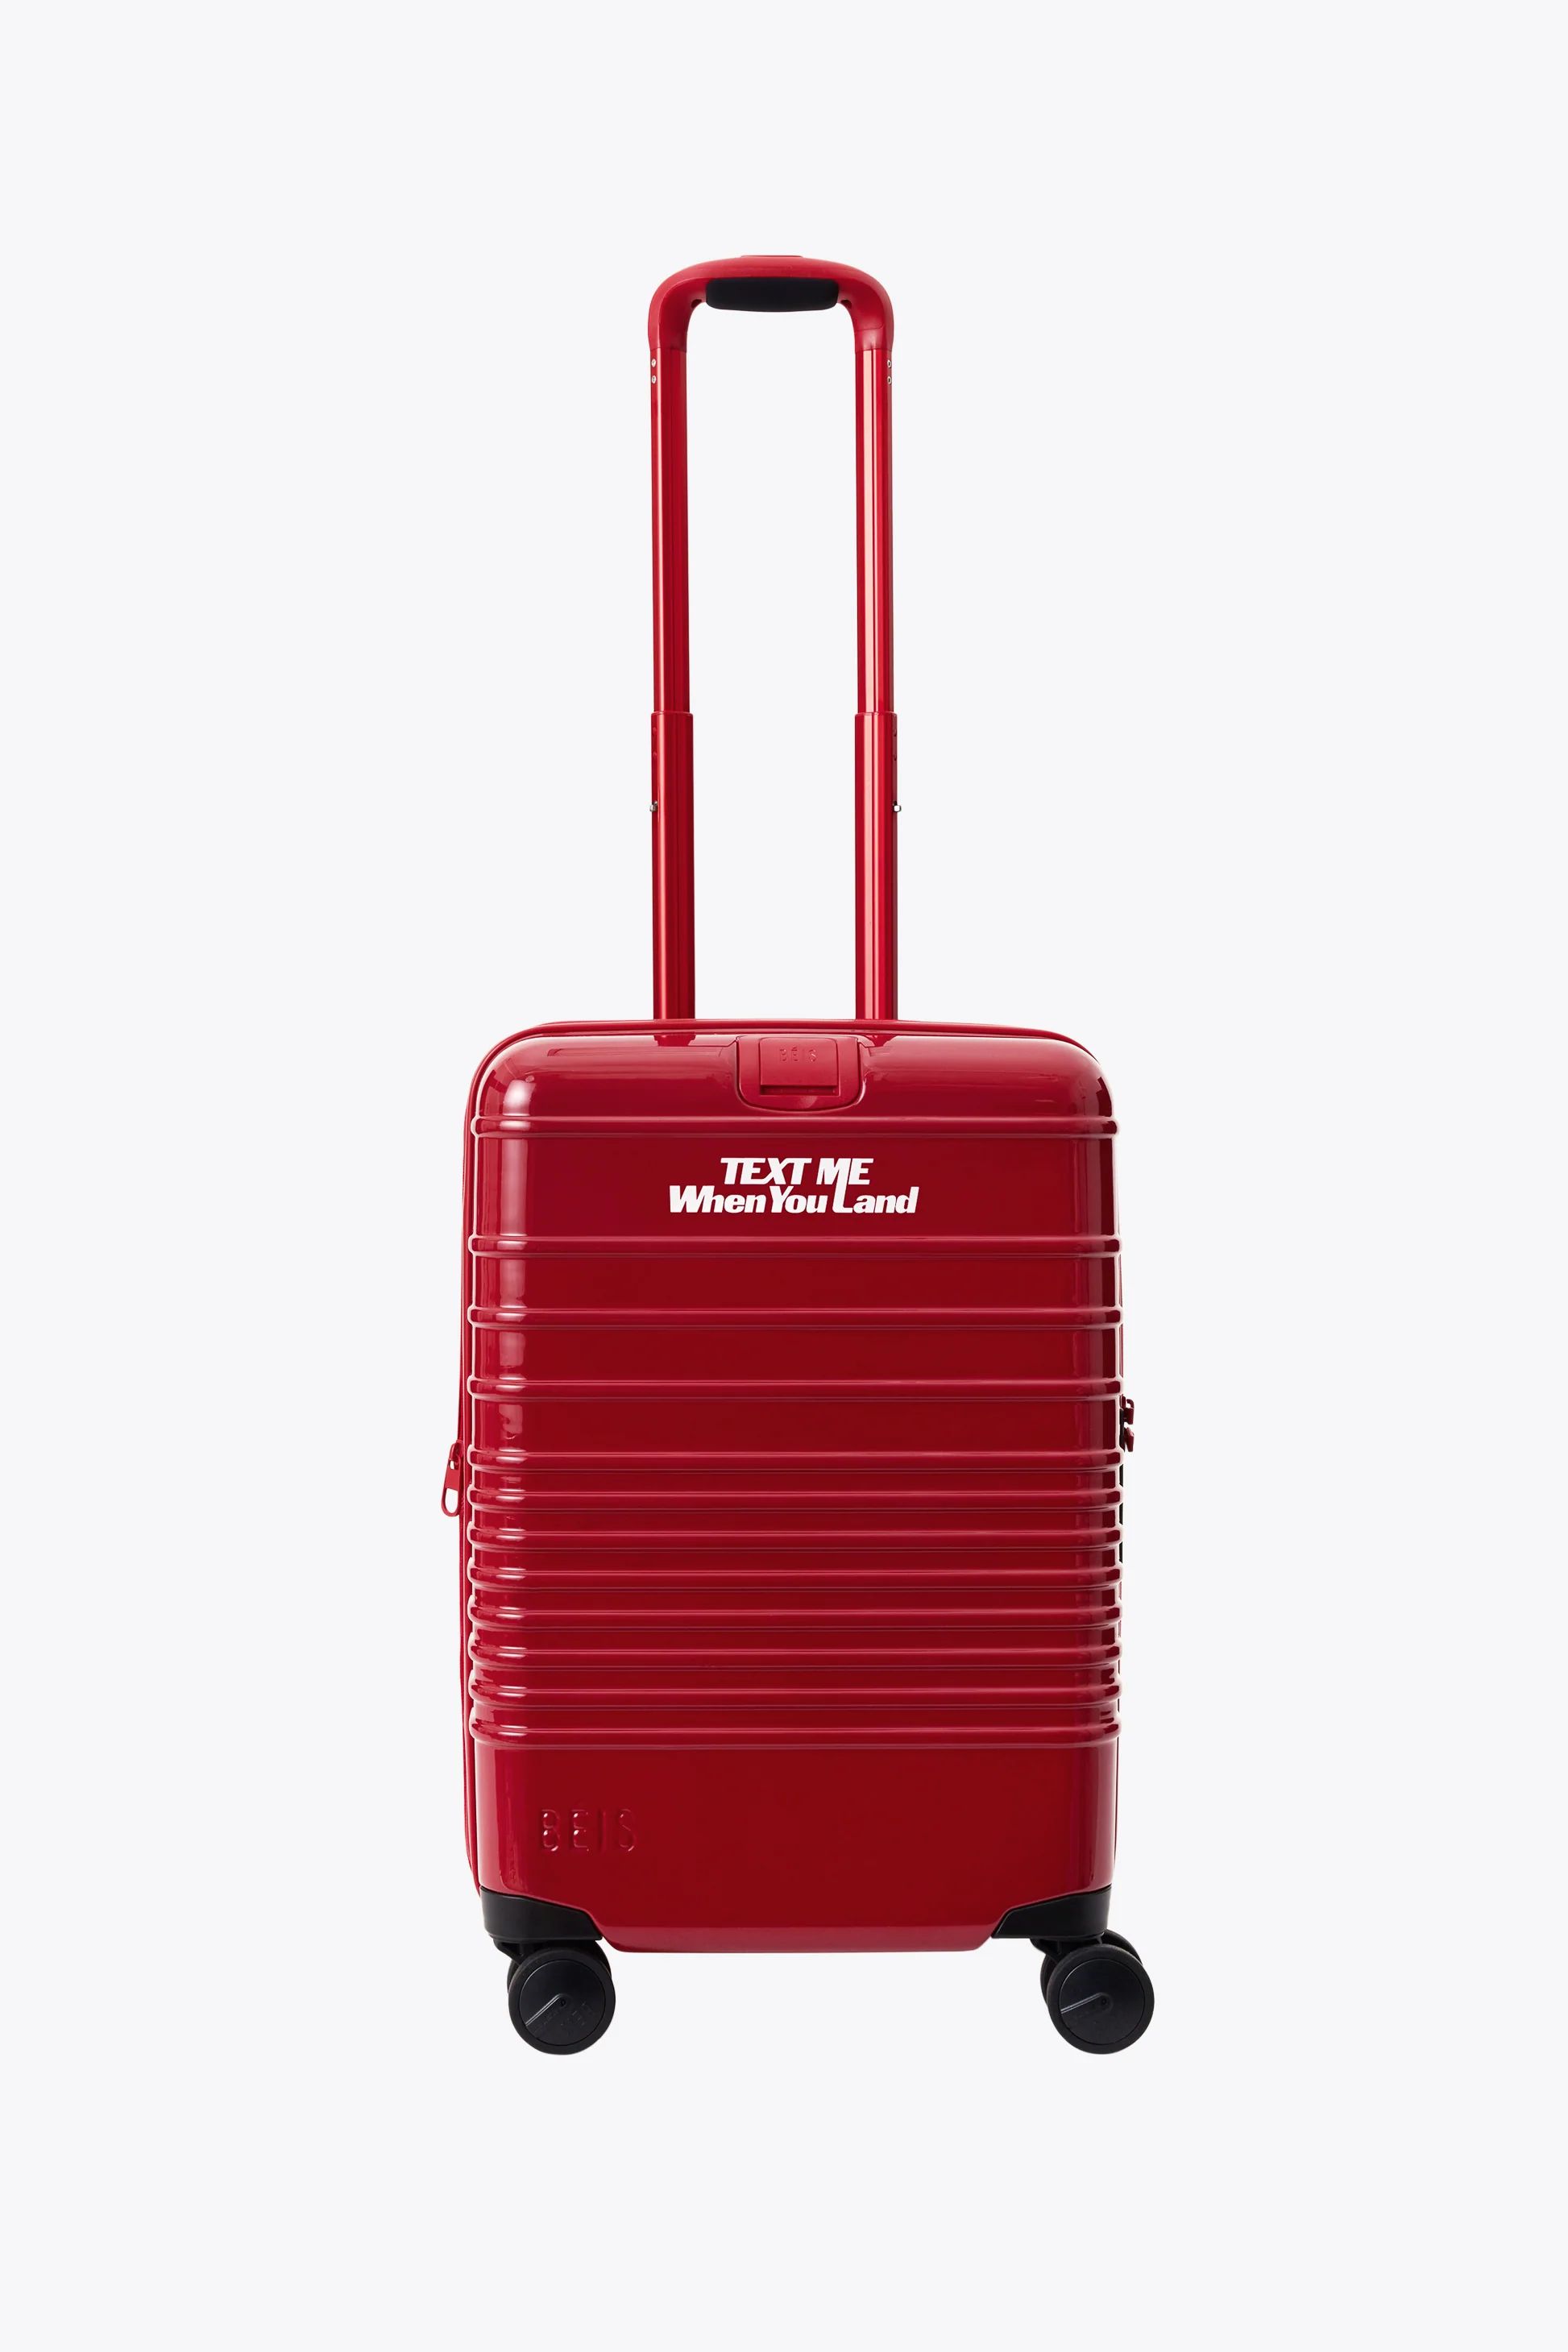 The Carry-On Roller in Text Me Red | BÉIS Travel